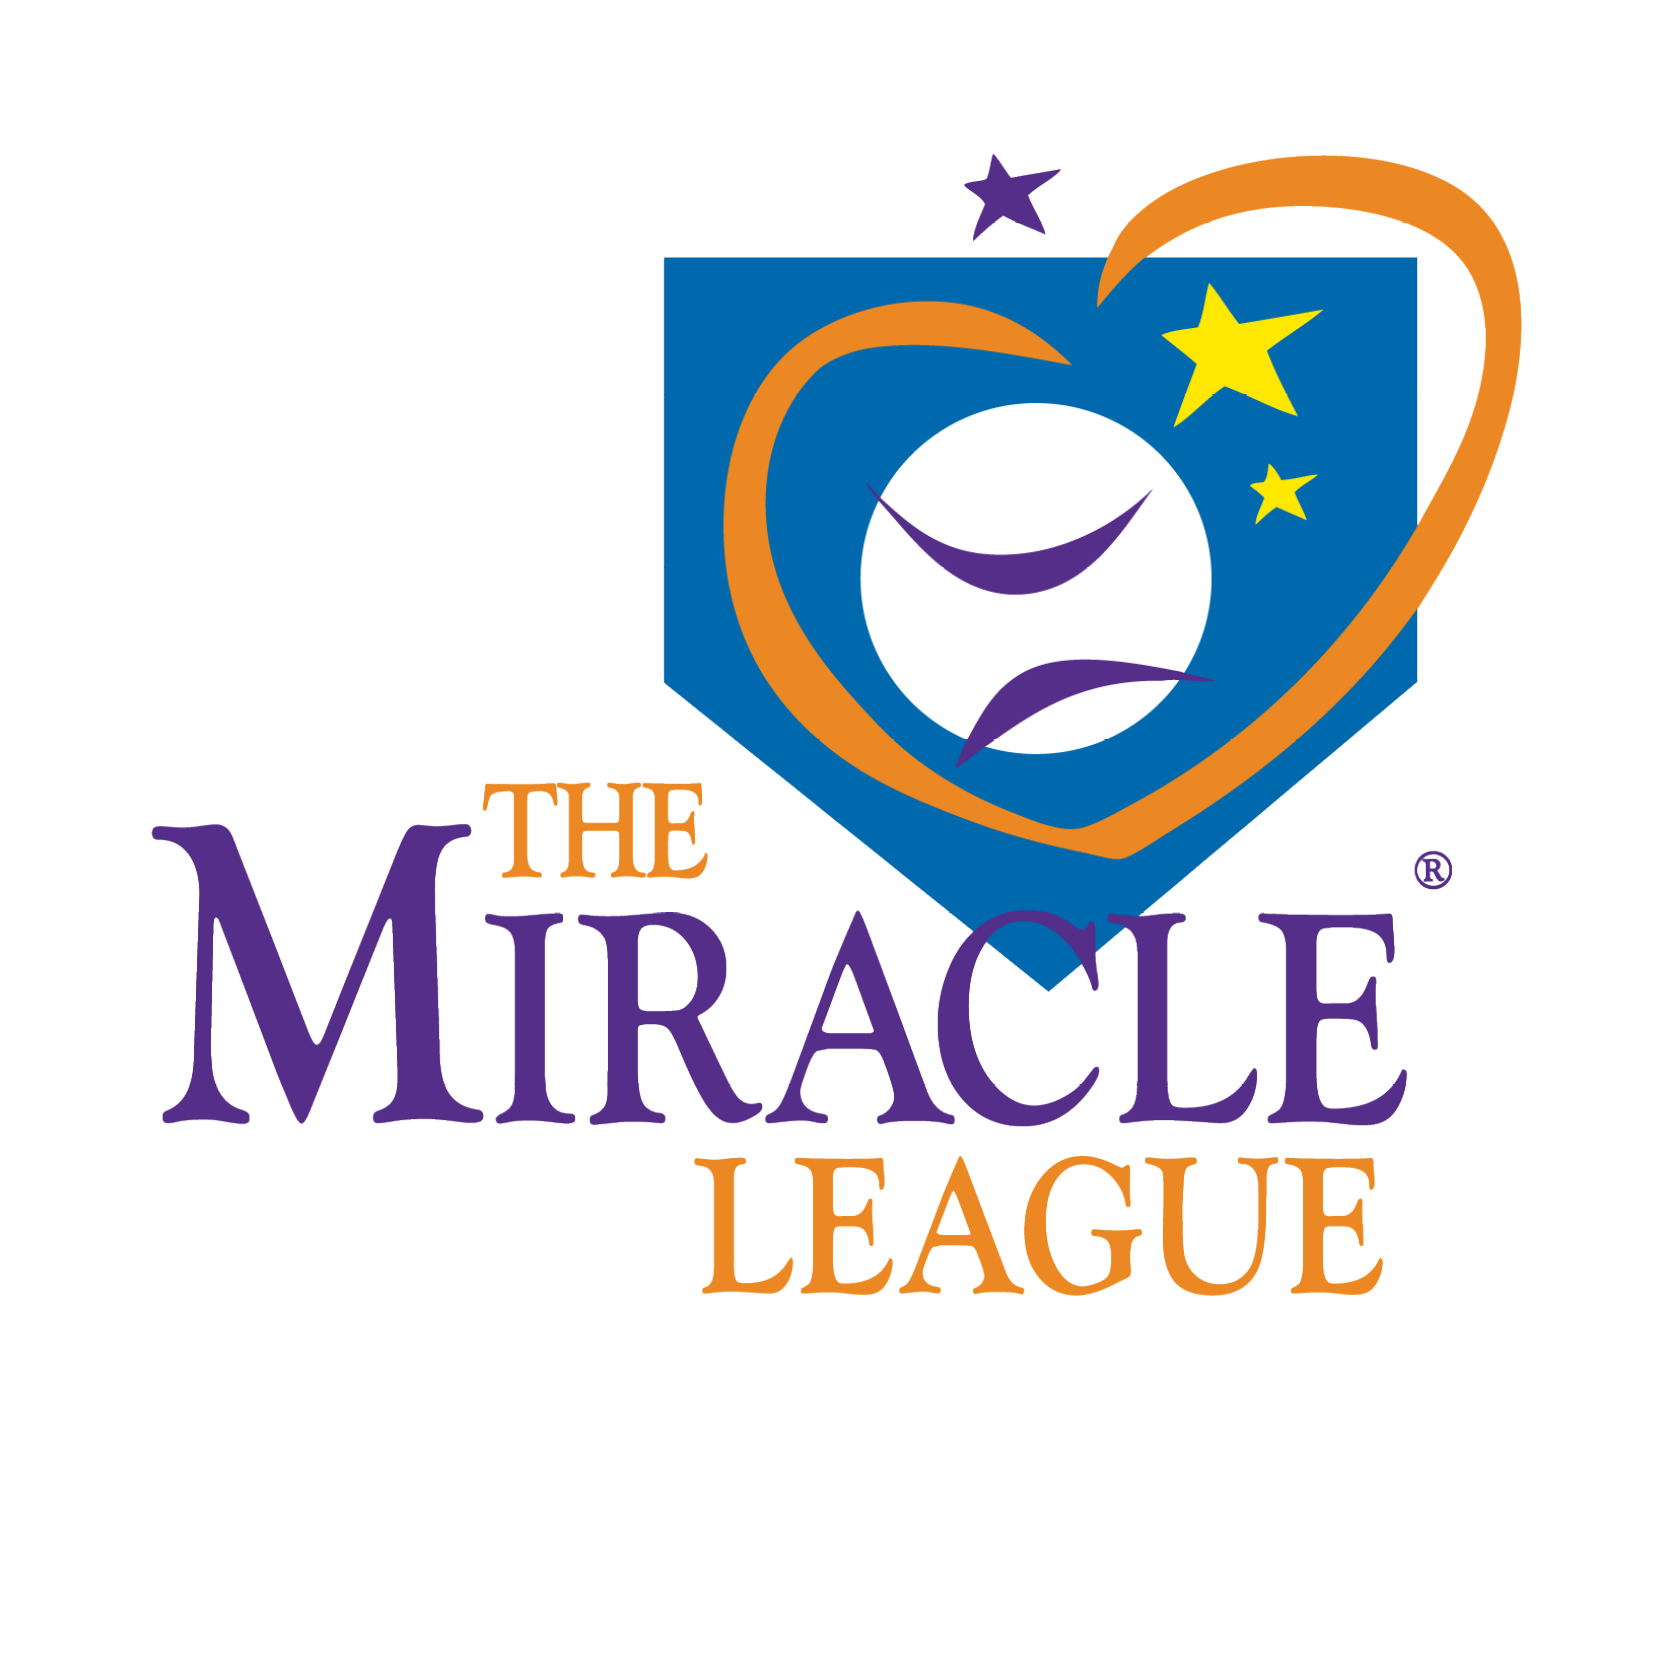 The Miracle League logo